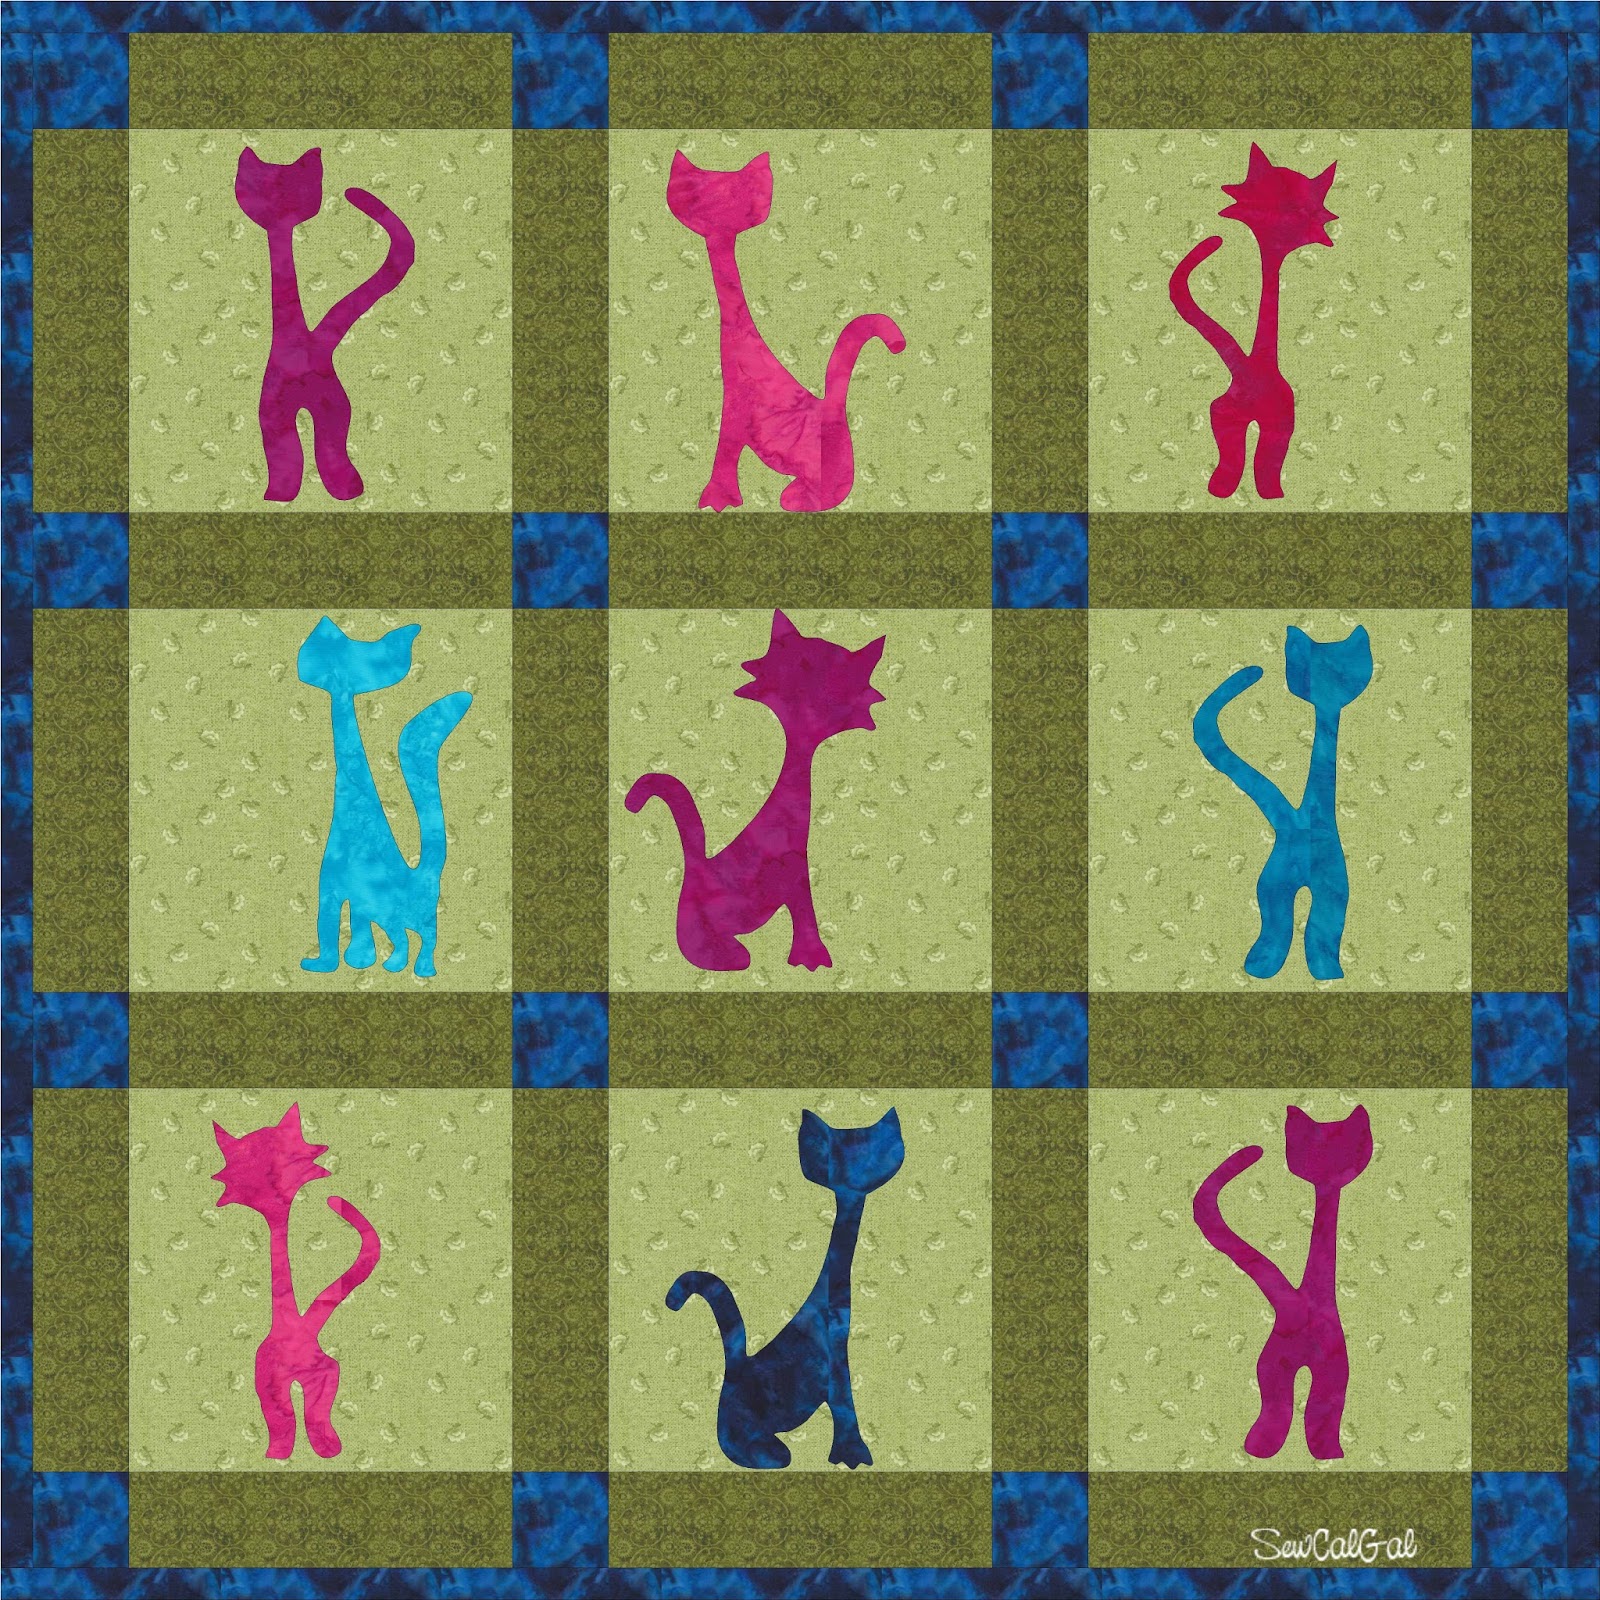 clipart of quilt - photo #8